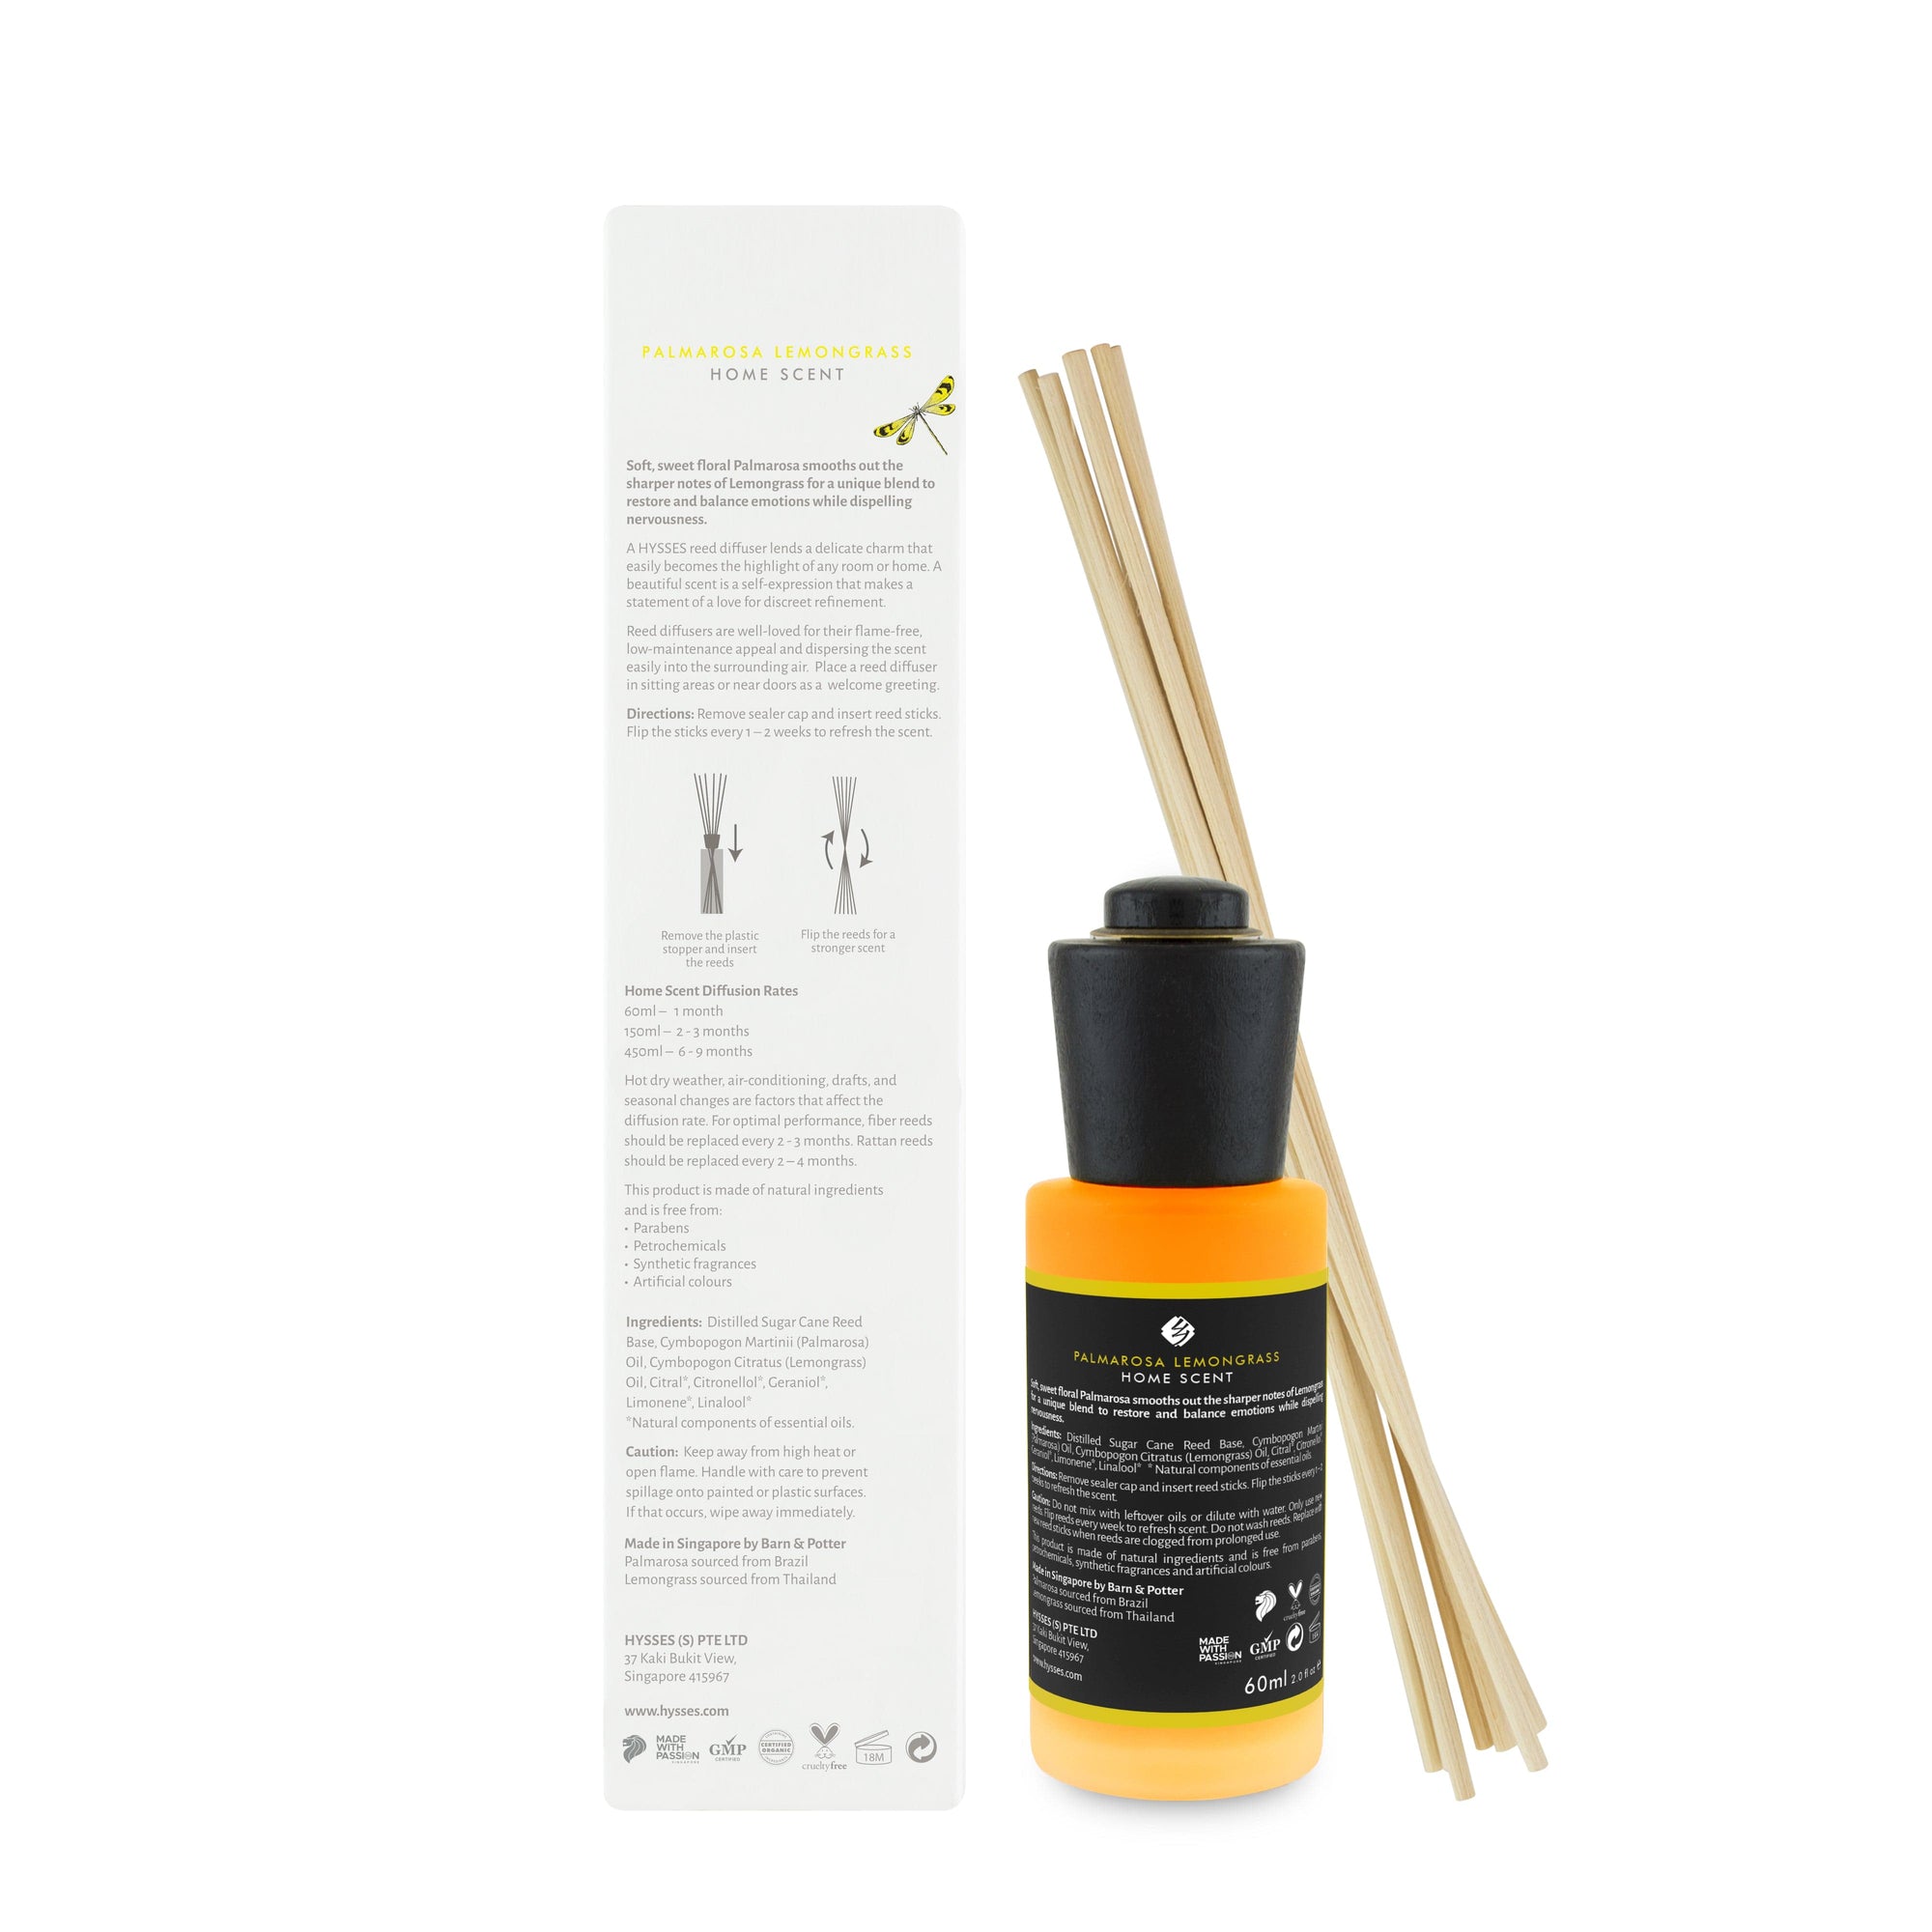 Hysses Home Scents Copy of Home Scent Reed Diffuser Lemon Geranium